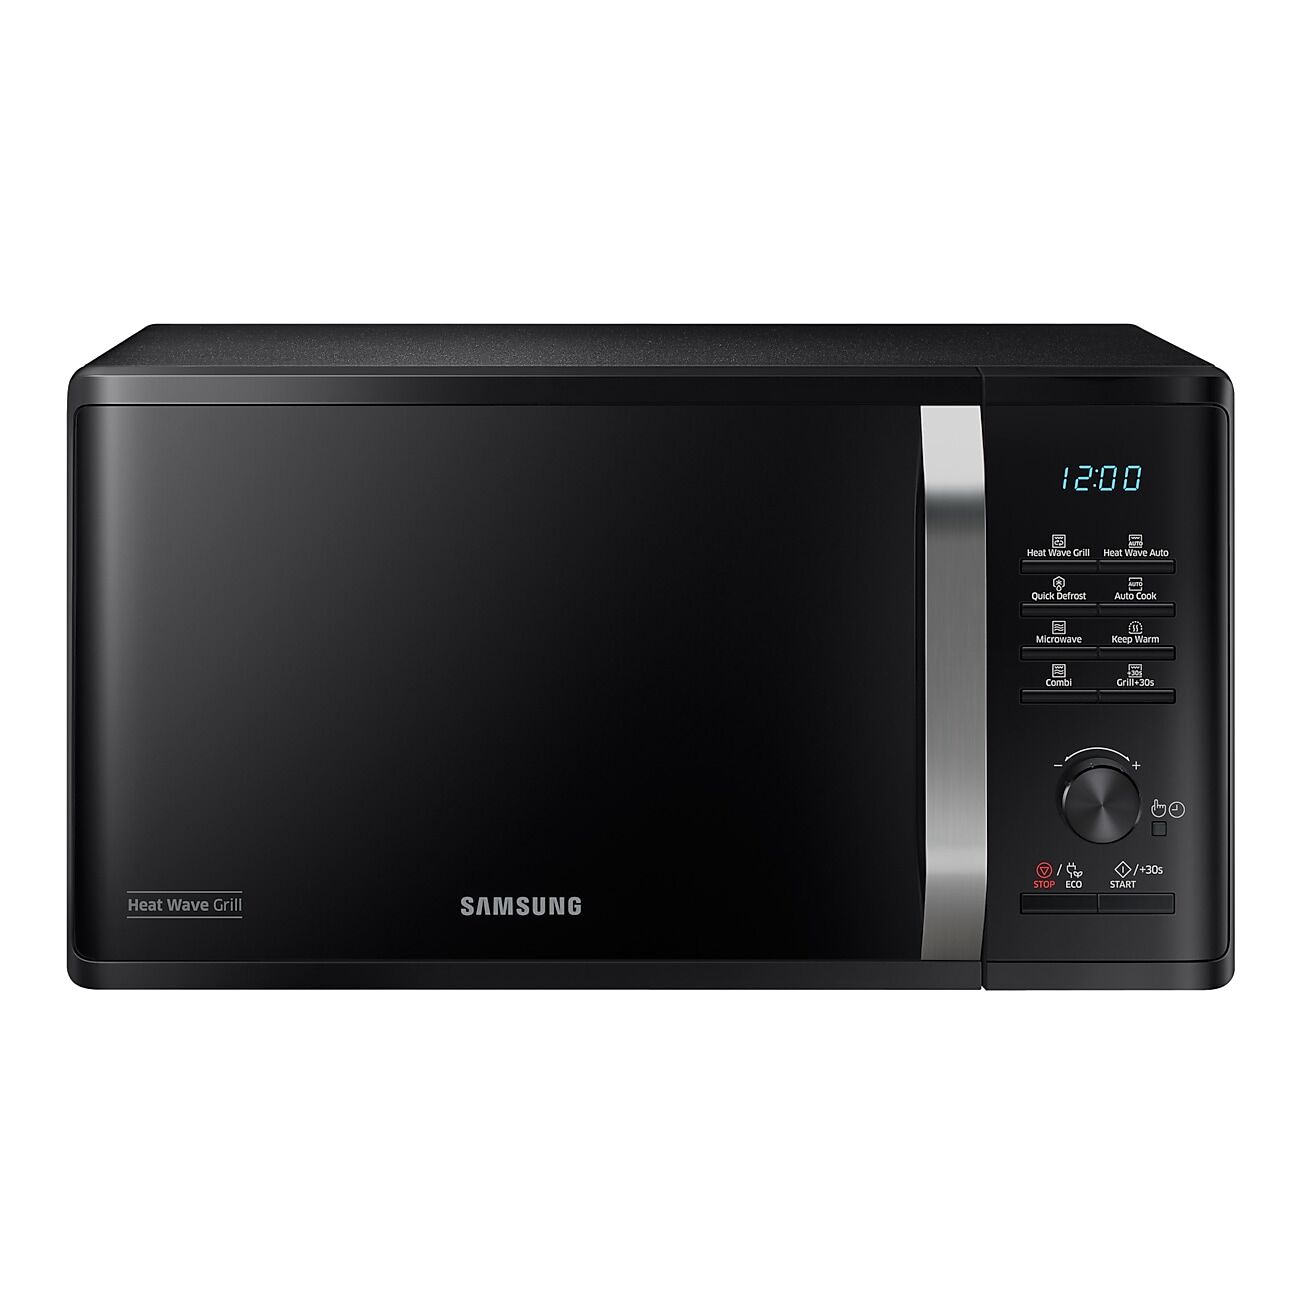 Samsung Black MW3500K Microwave Oven with Heat Wave Grill, 23L